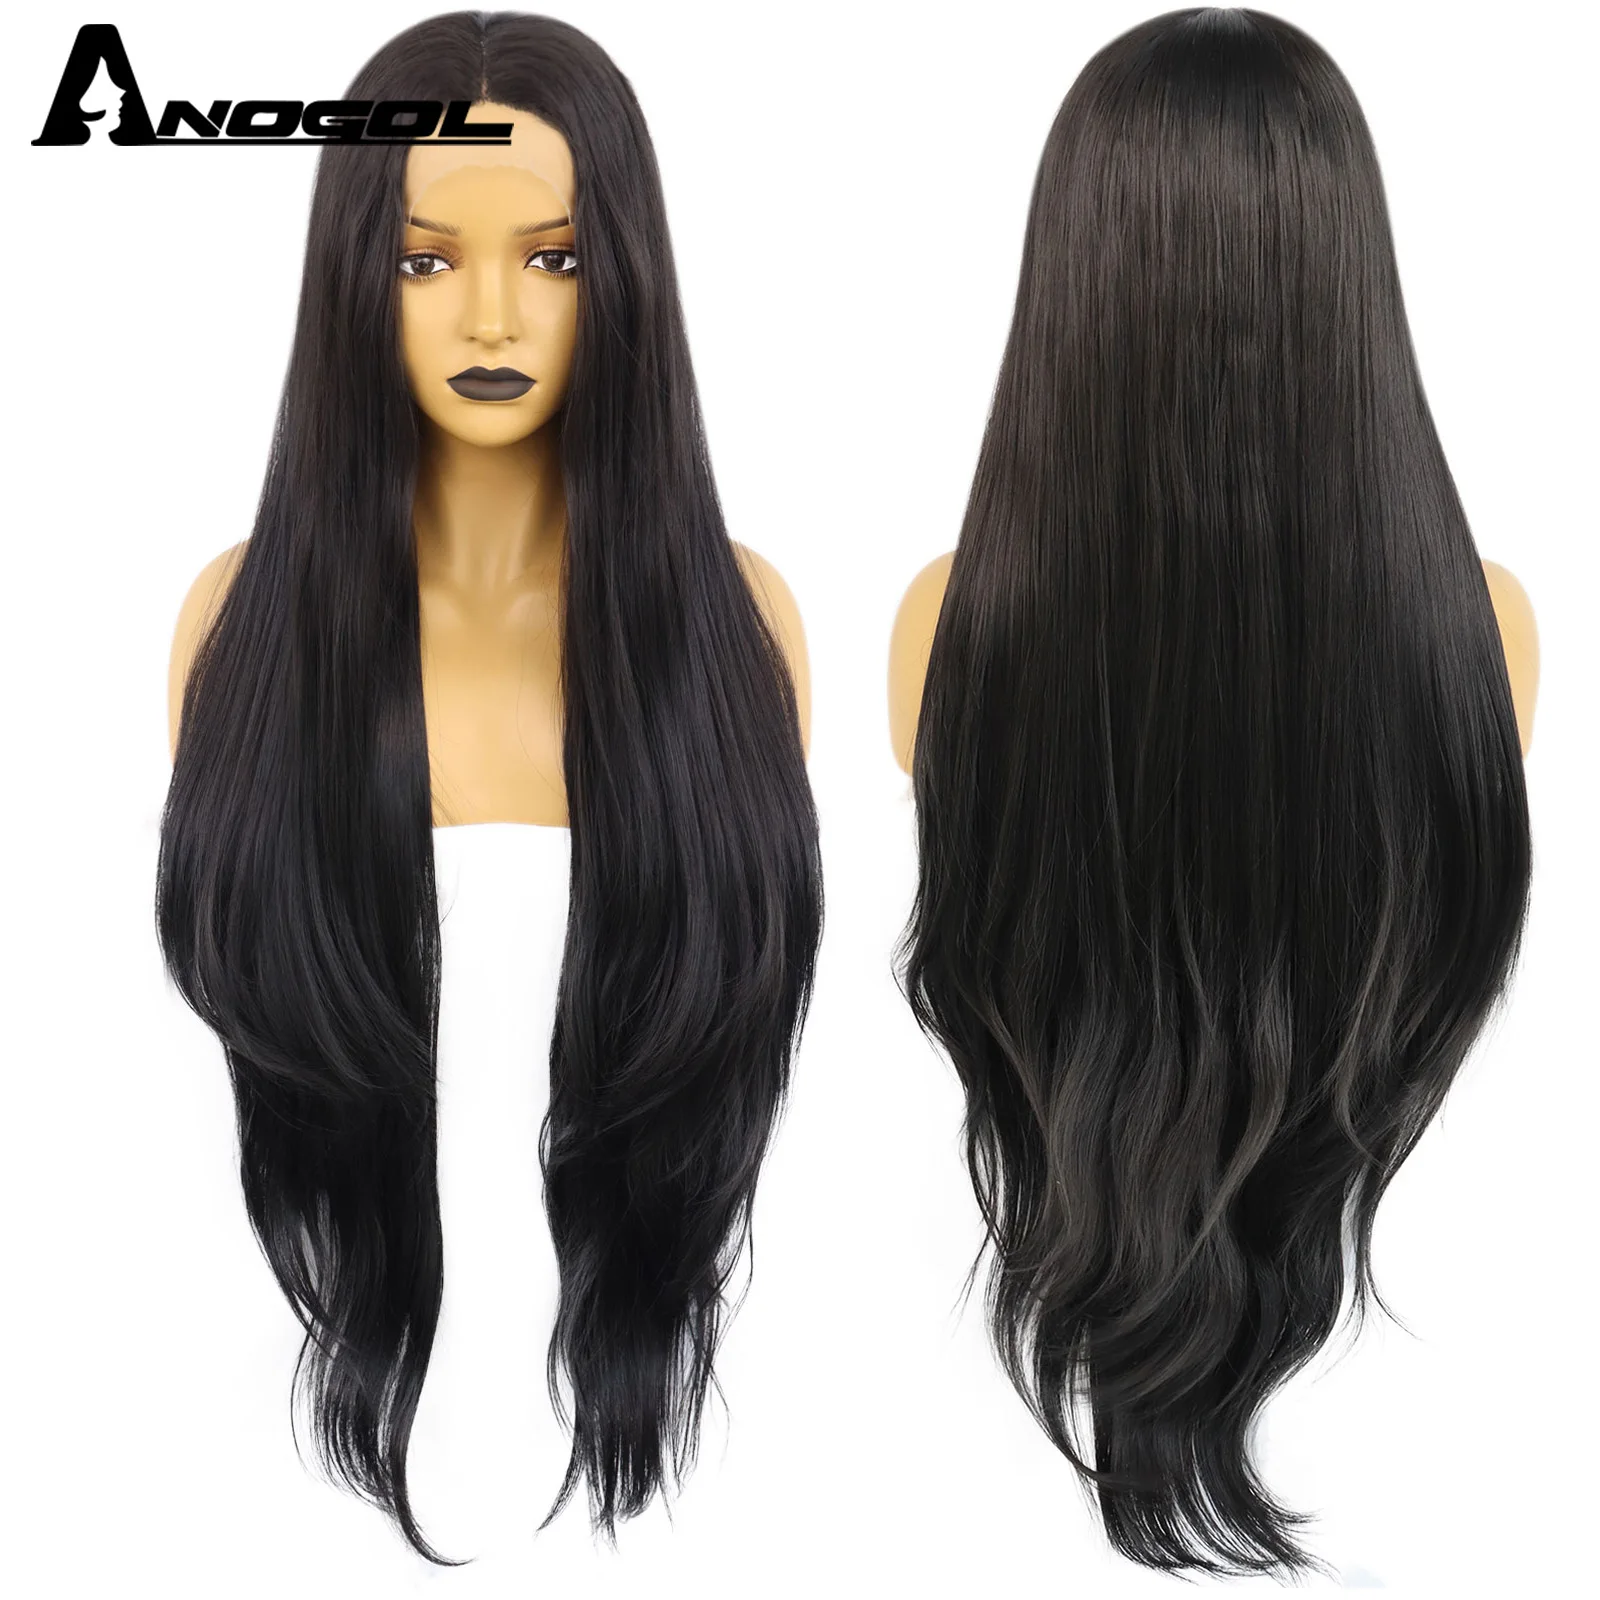 AN Synthetic Wig 40inch Natural Black Body Wave 13x1 Tpart Lace Wig Long #1B Black Heat Resistant Fiber Wig for Women Brazilians